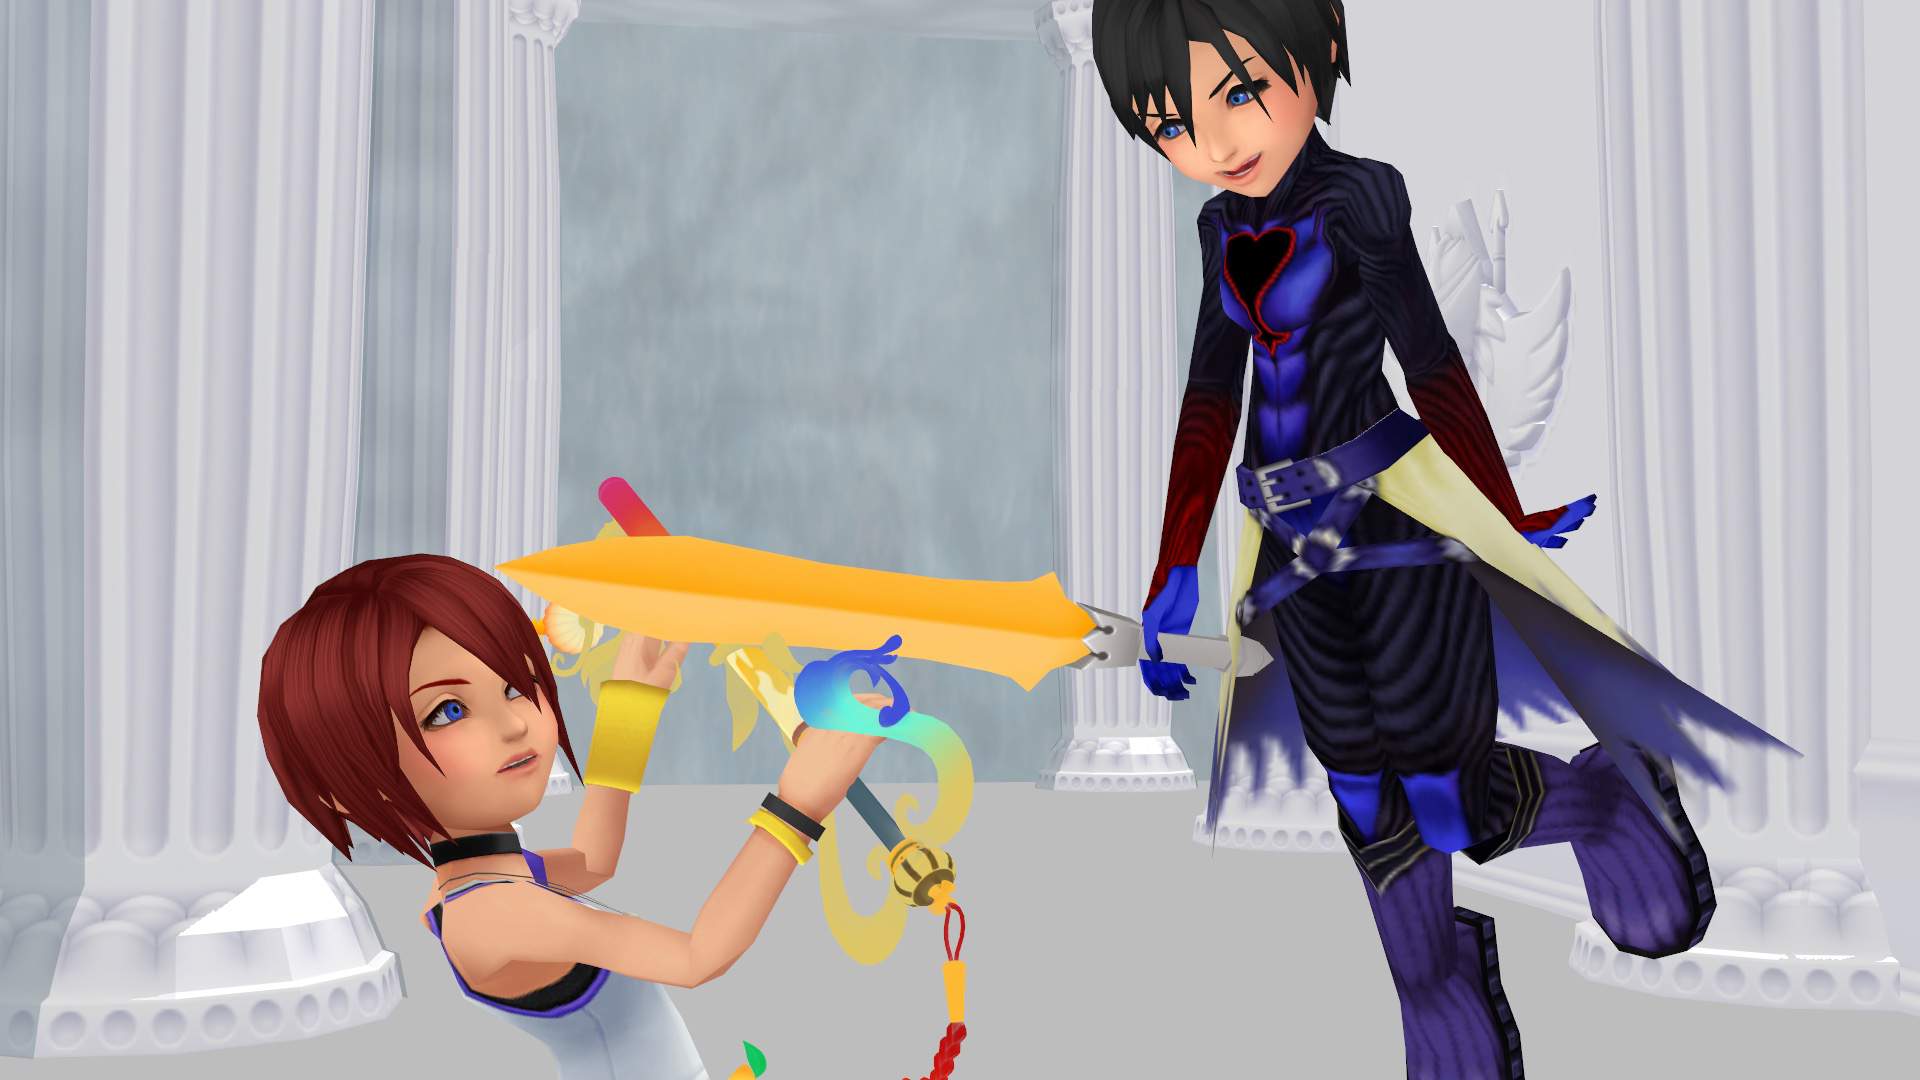 chain-of-memories-roleswap-forget-me-not-kingdom-hearts-amino